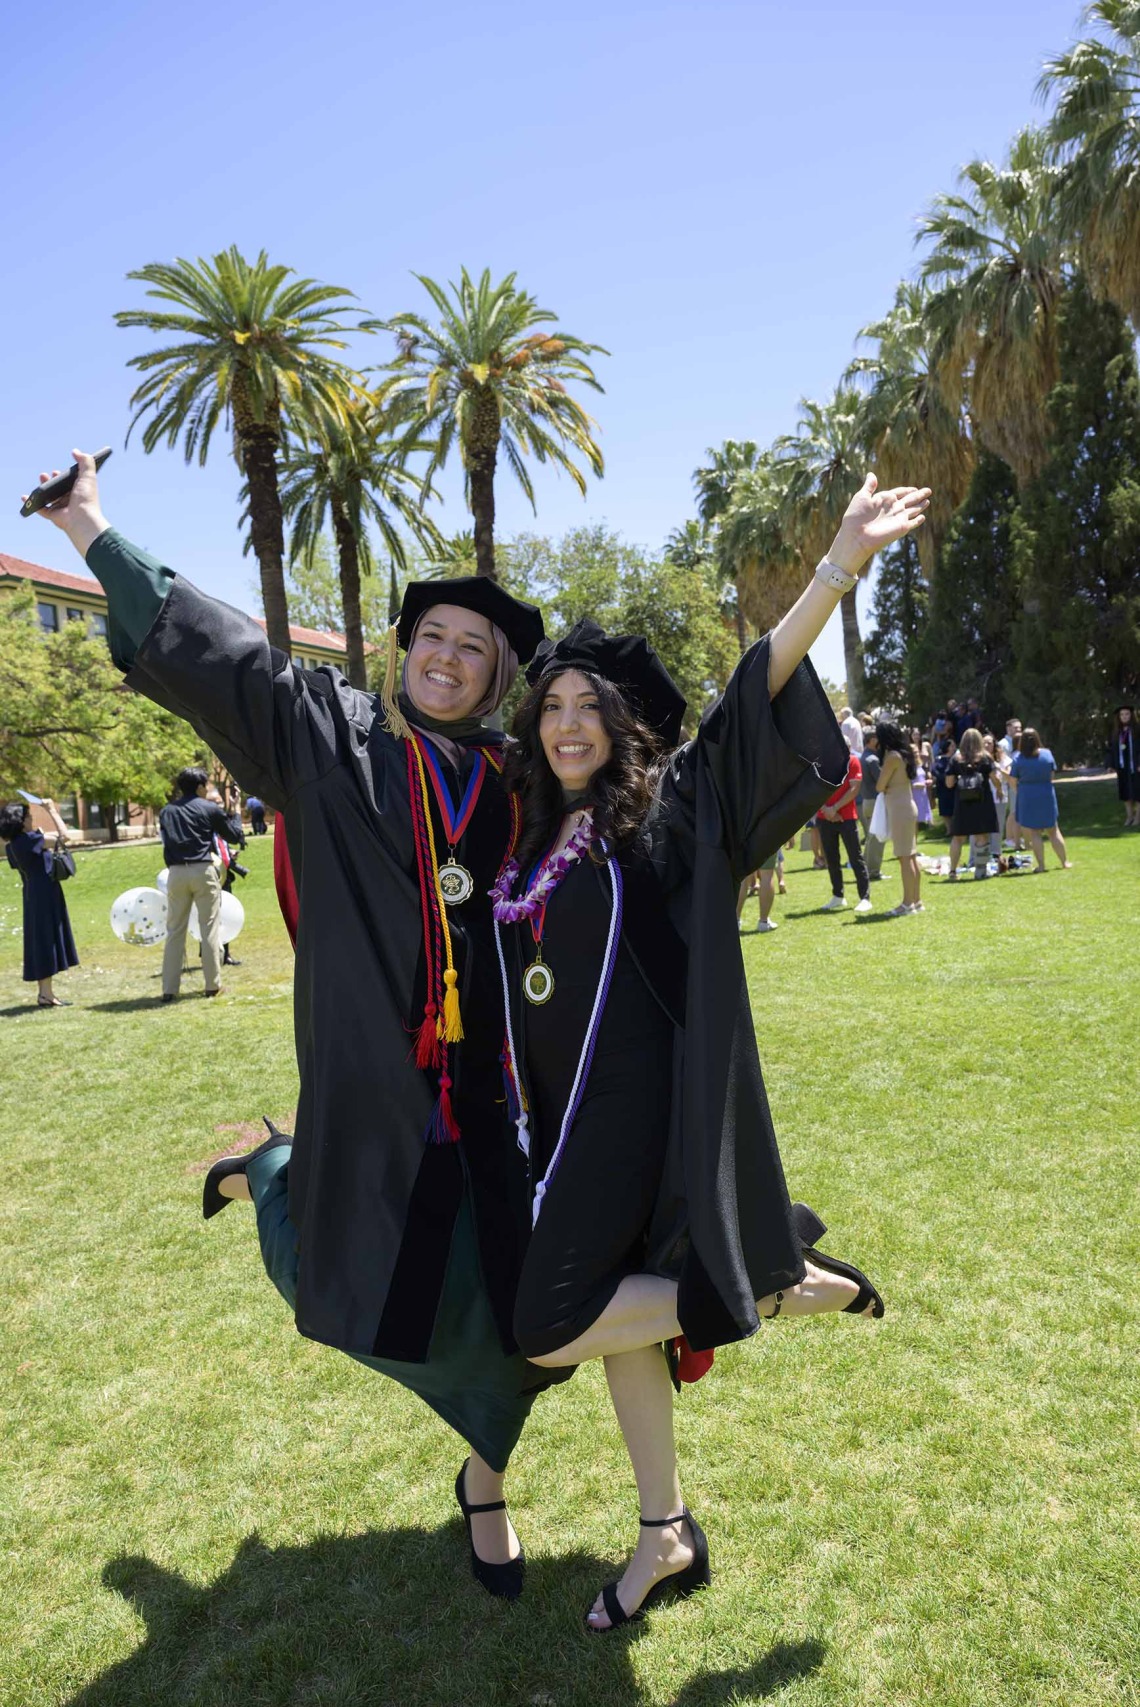 Two University of Arizona R. Ken Coit College of Pharmacy students wearing graduation caps and gowns celebrate with their hands in the air.